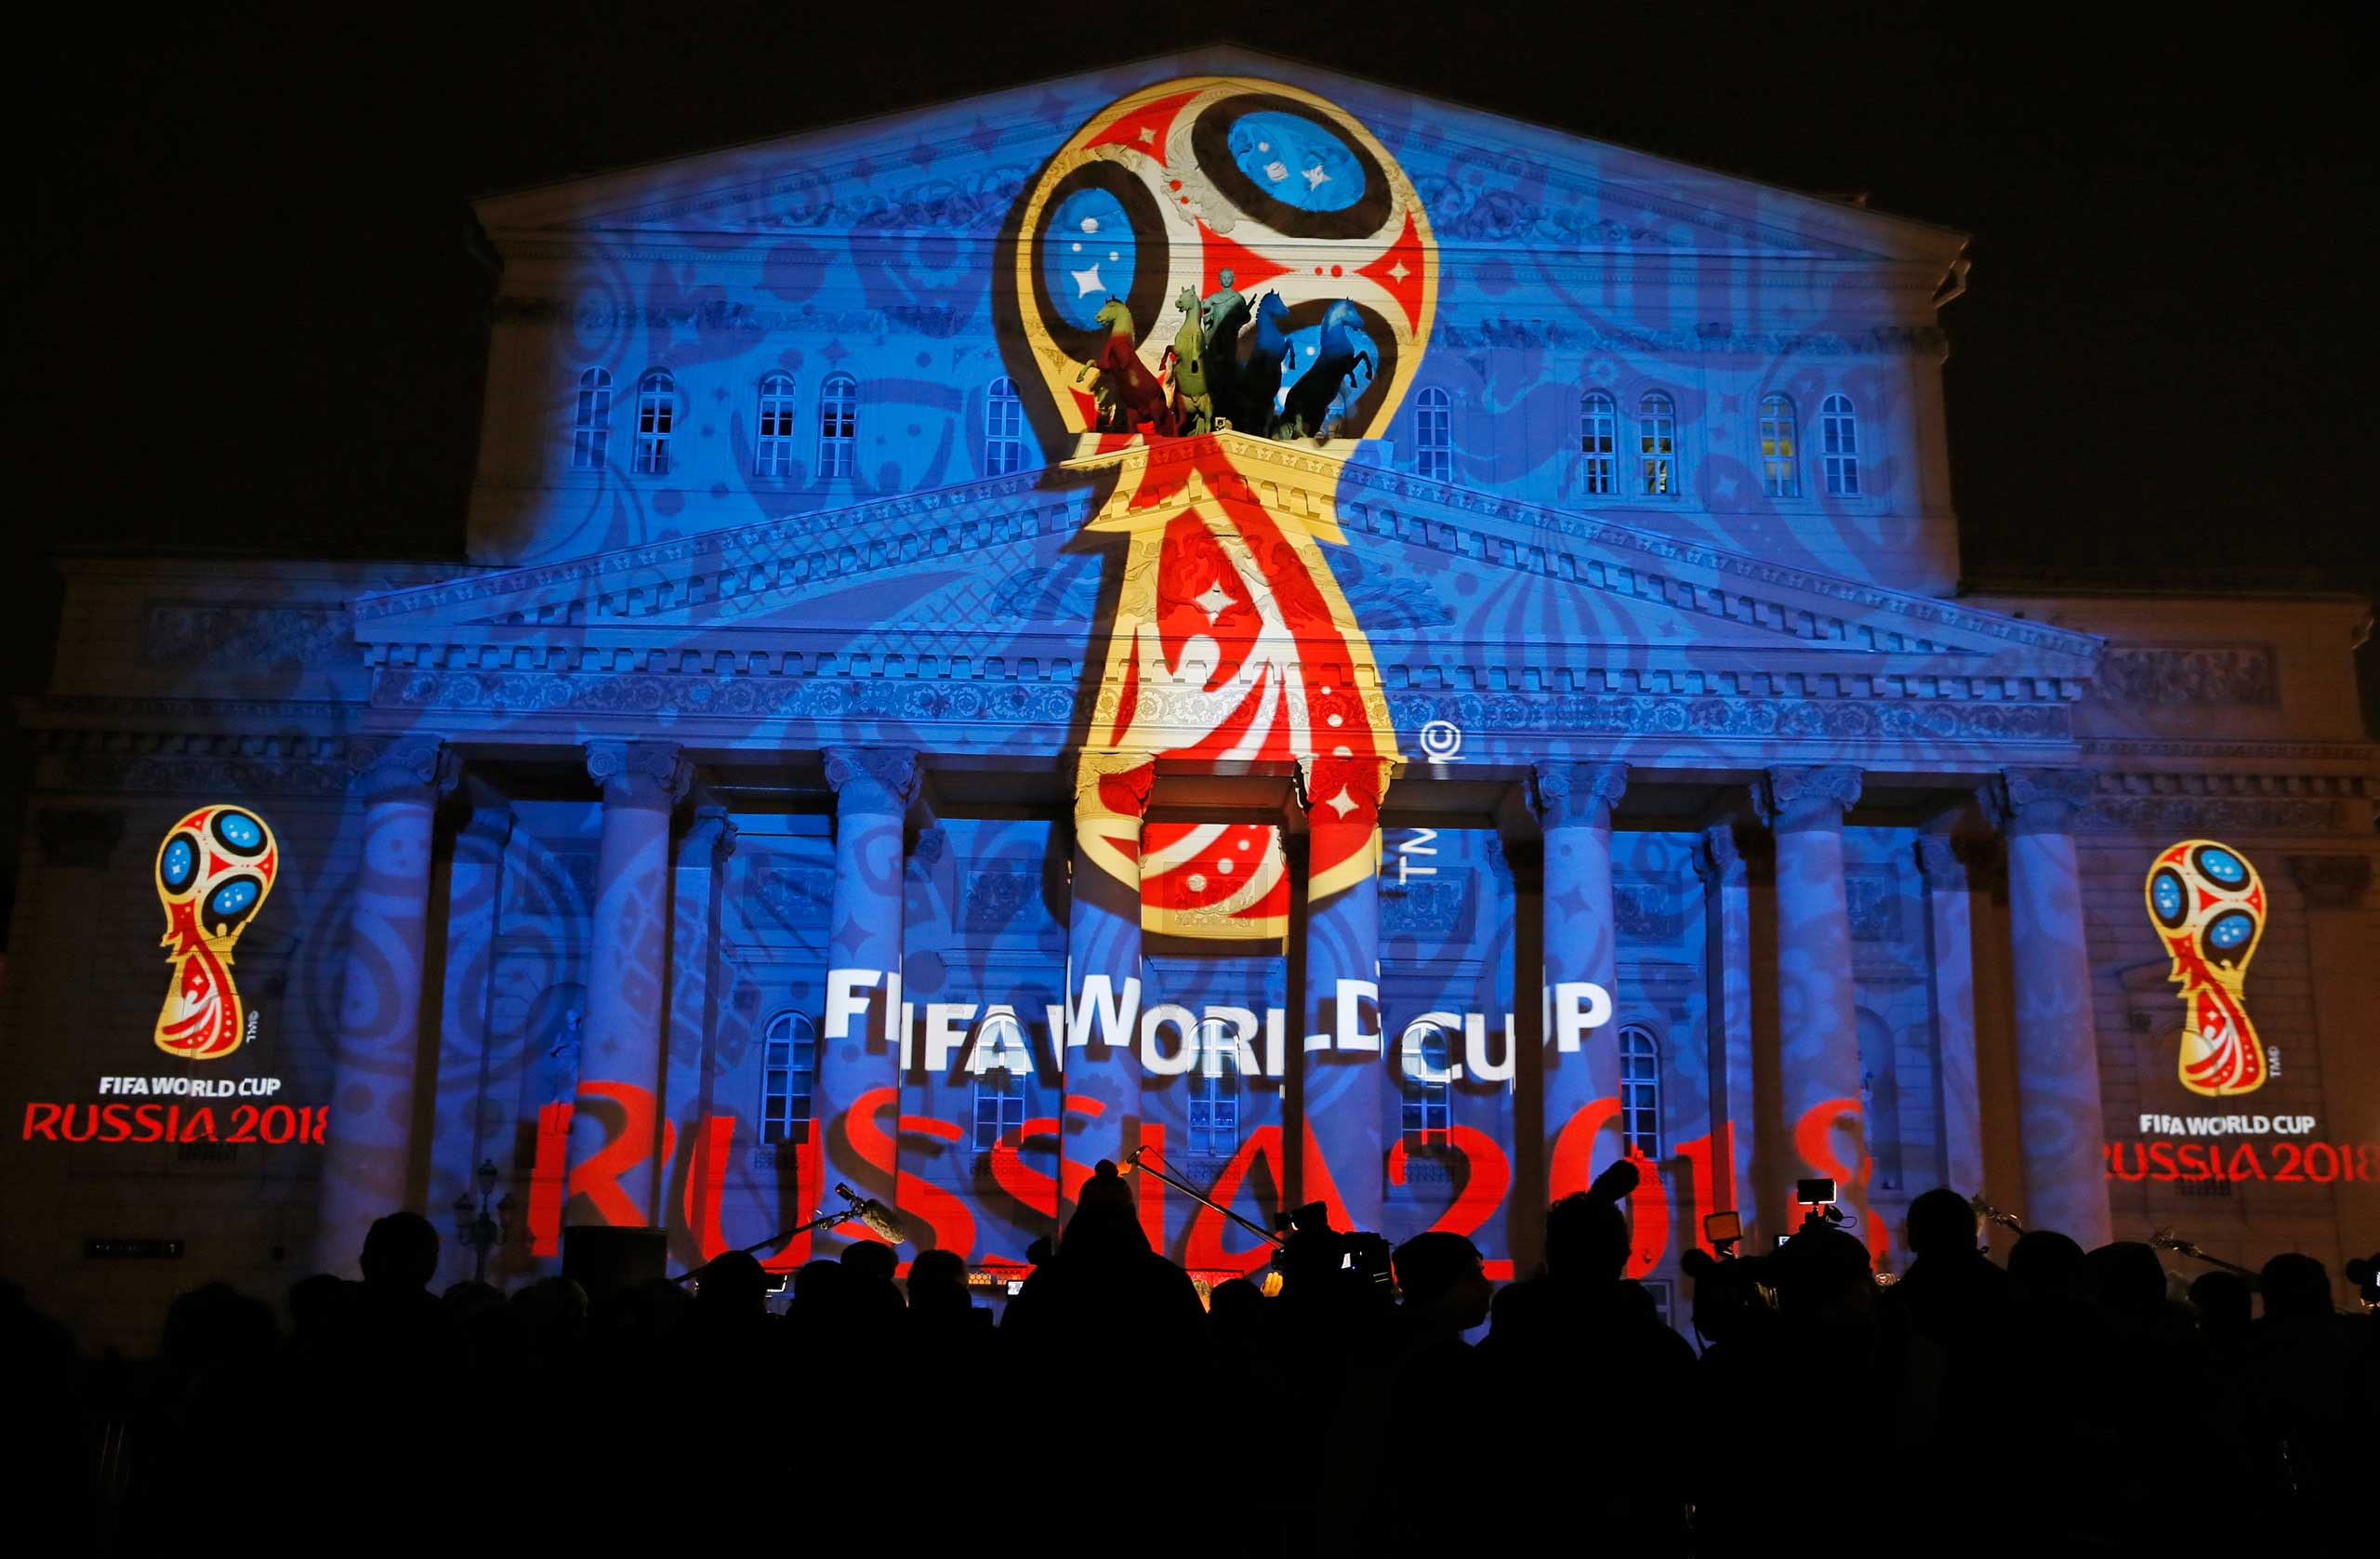 Journalists look at a light installation showing the official logotype of the 2018 FIFA World Cup during its unveiling ceremony at the Bolshoi Theater building in Moscow, October 28, 2014. (Maxim Shemetov—Reuters)